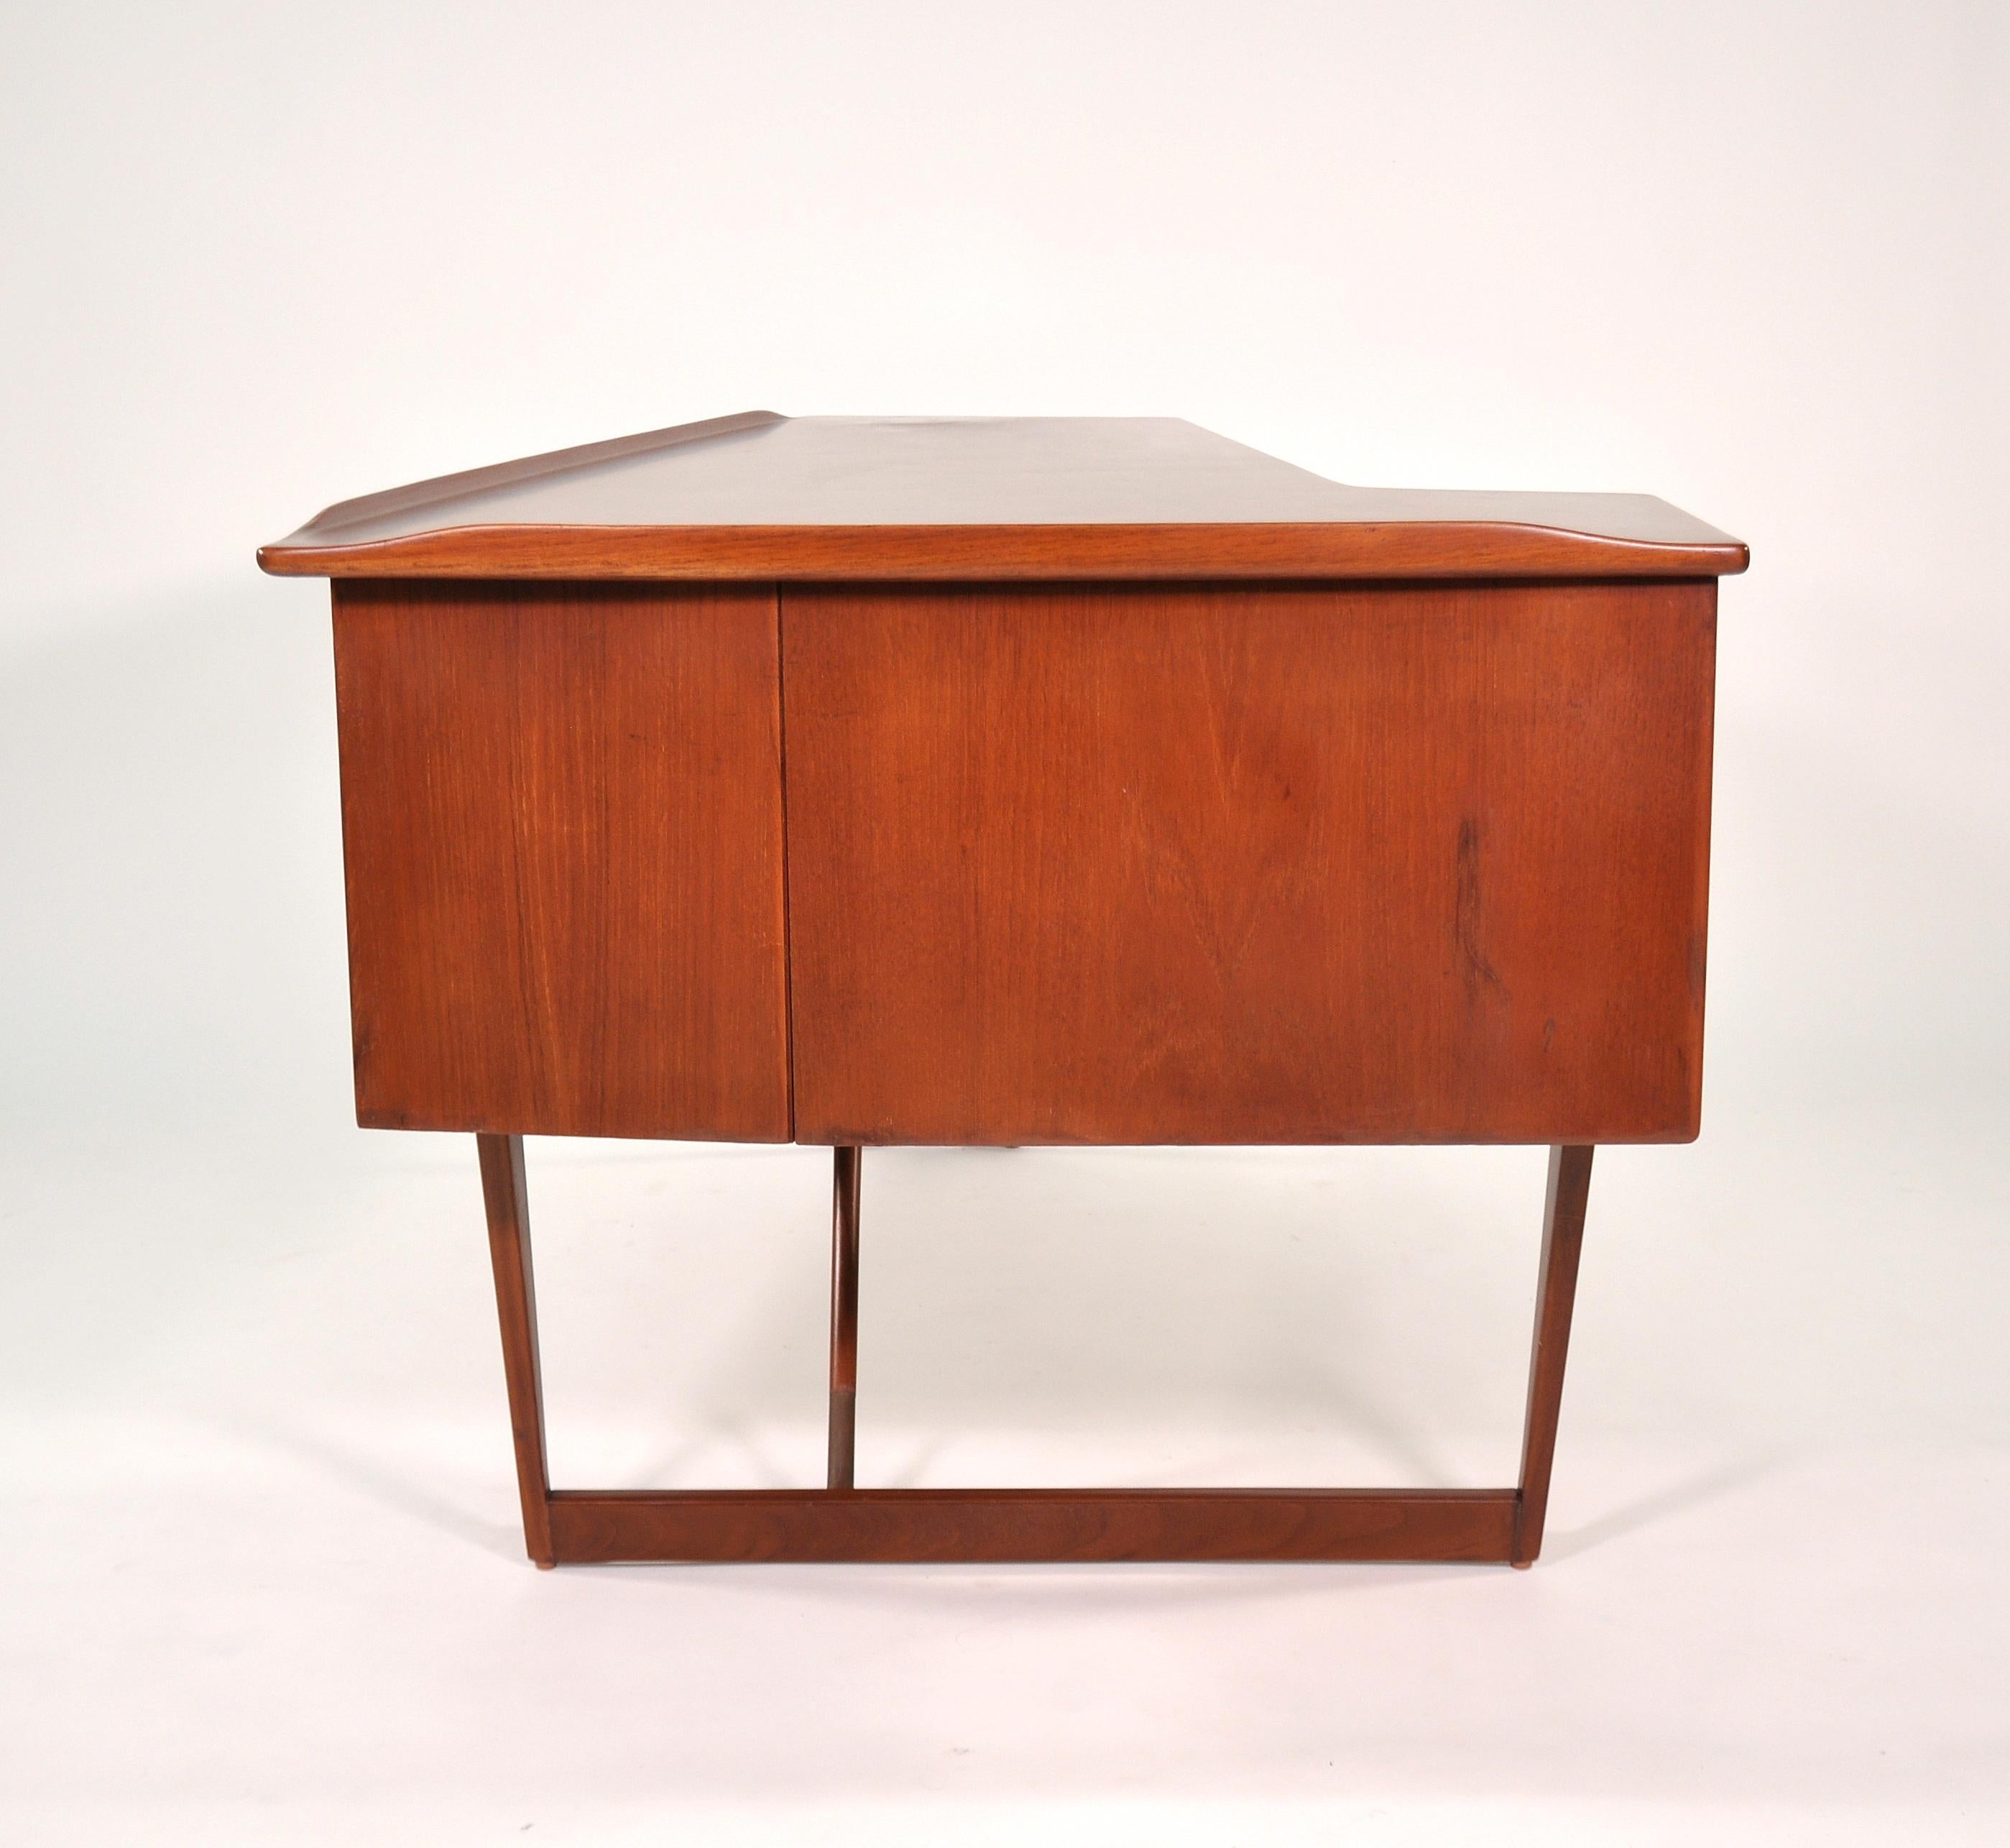 Vintage midcentury Danish modern teak writing table with secret bar by Peter Løvig Nielsen for Dansk Designs, dating from circa 1965. The desk features an L-shaped top over three drawers. The backside features an open bookcase and a cabinet door